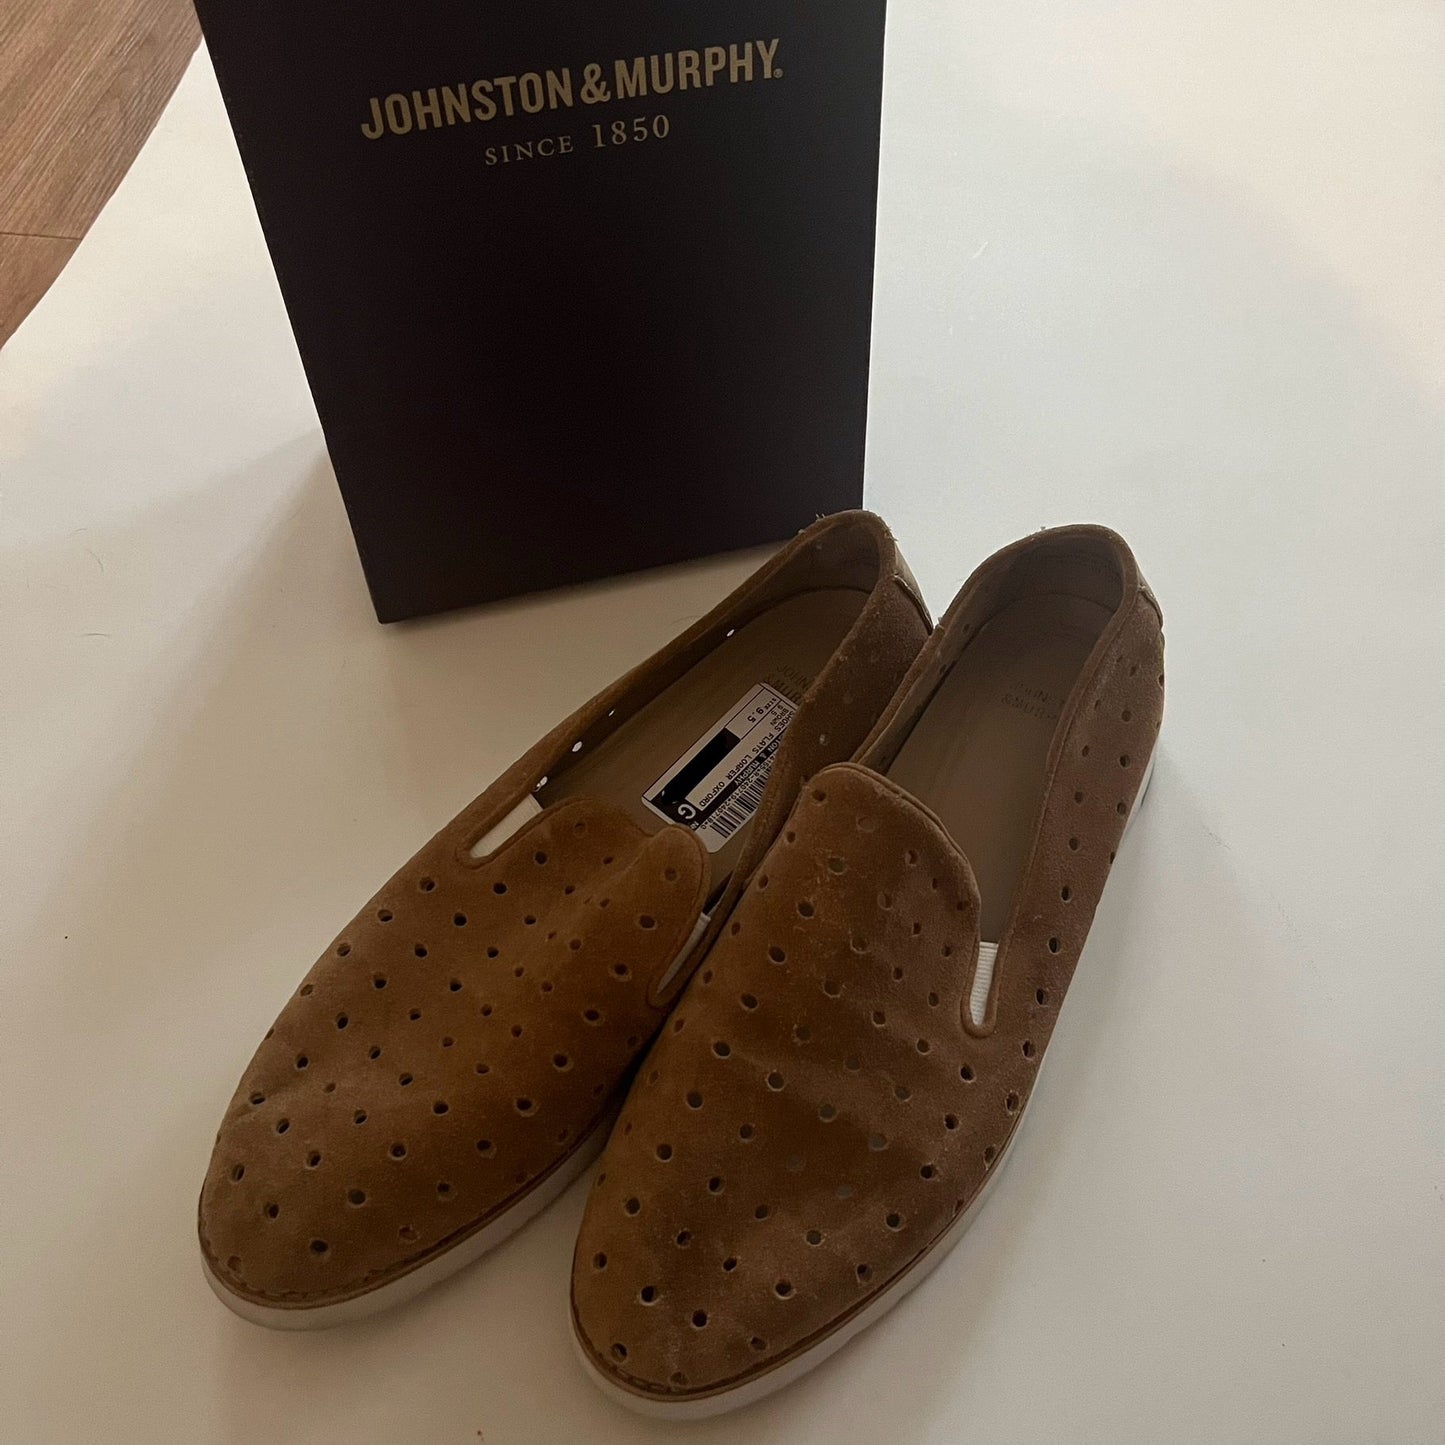 Brown Shoes Flats Loafer Oxford Johnston & Murphy, Size 9.5